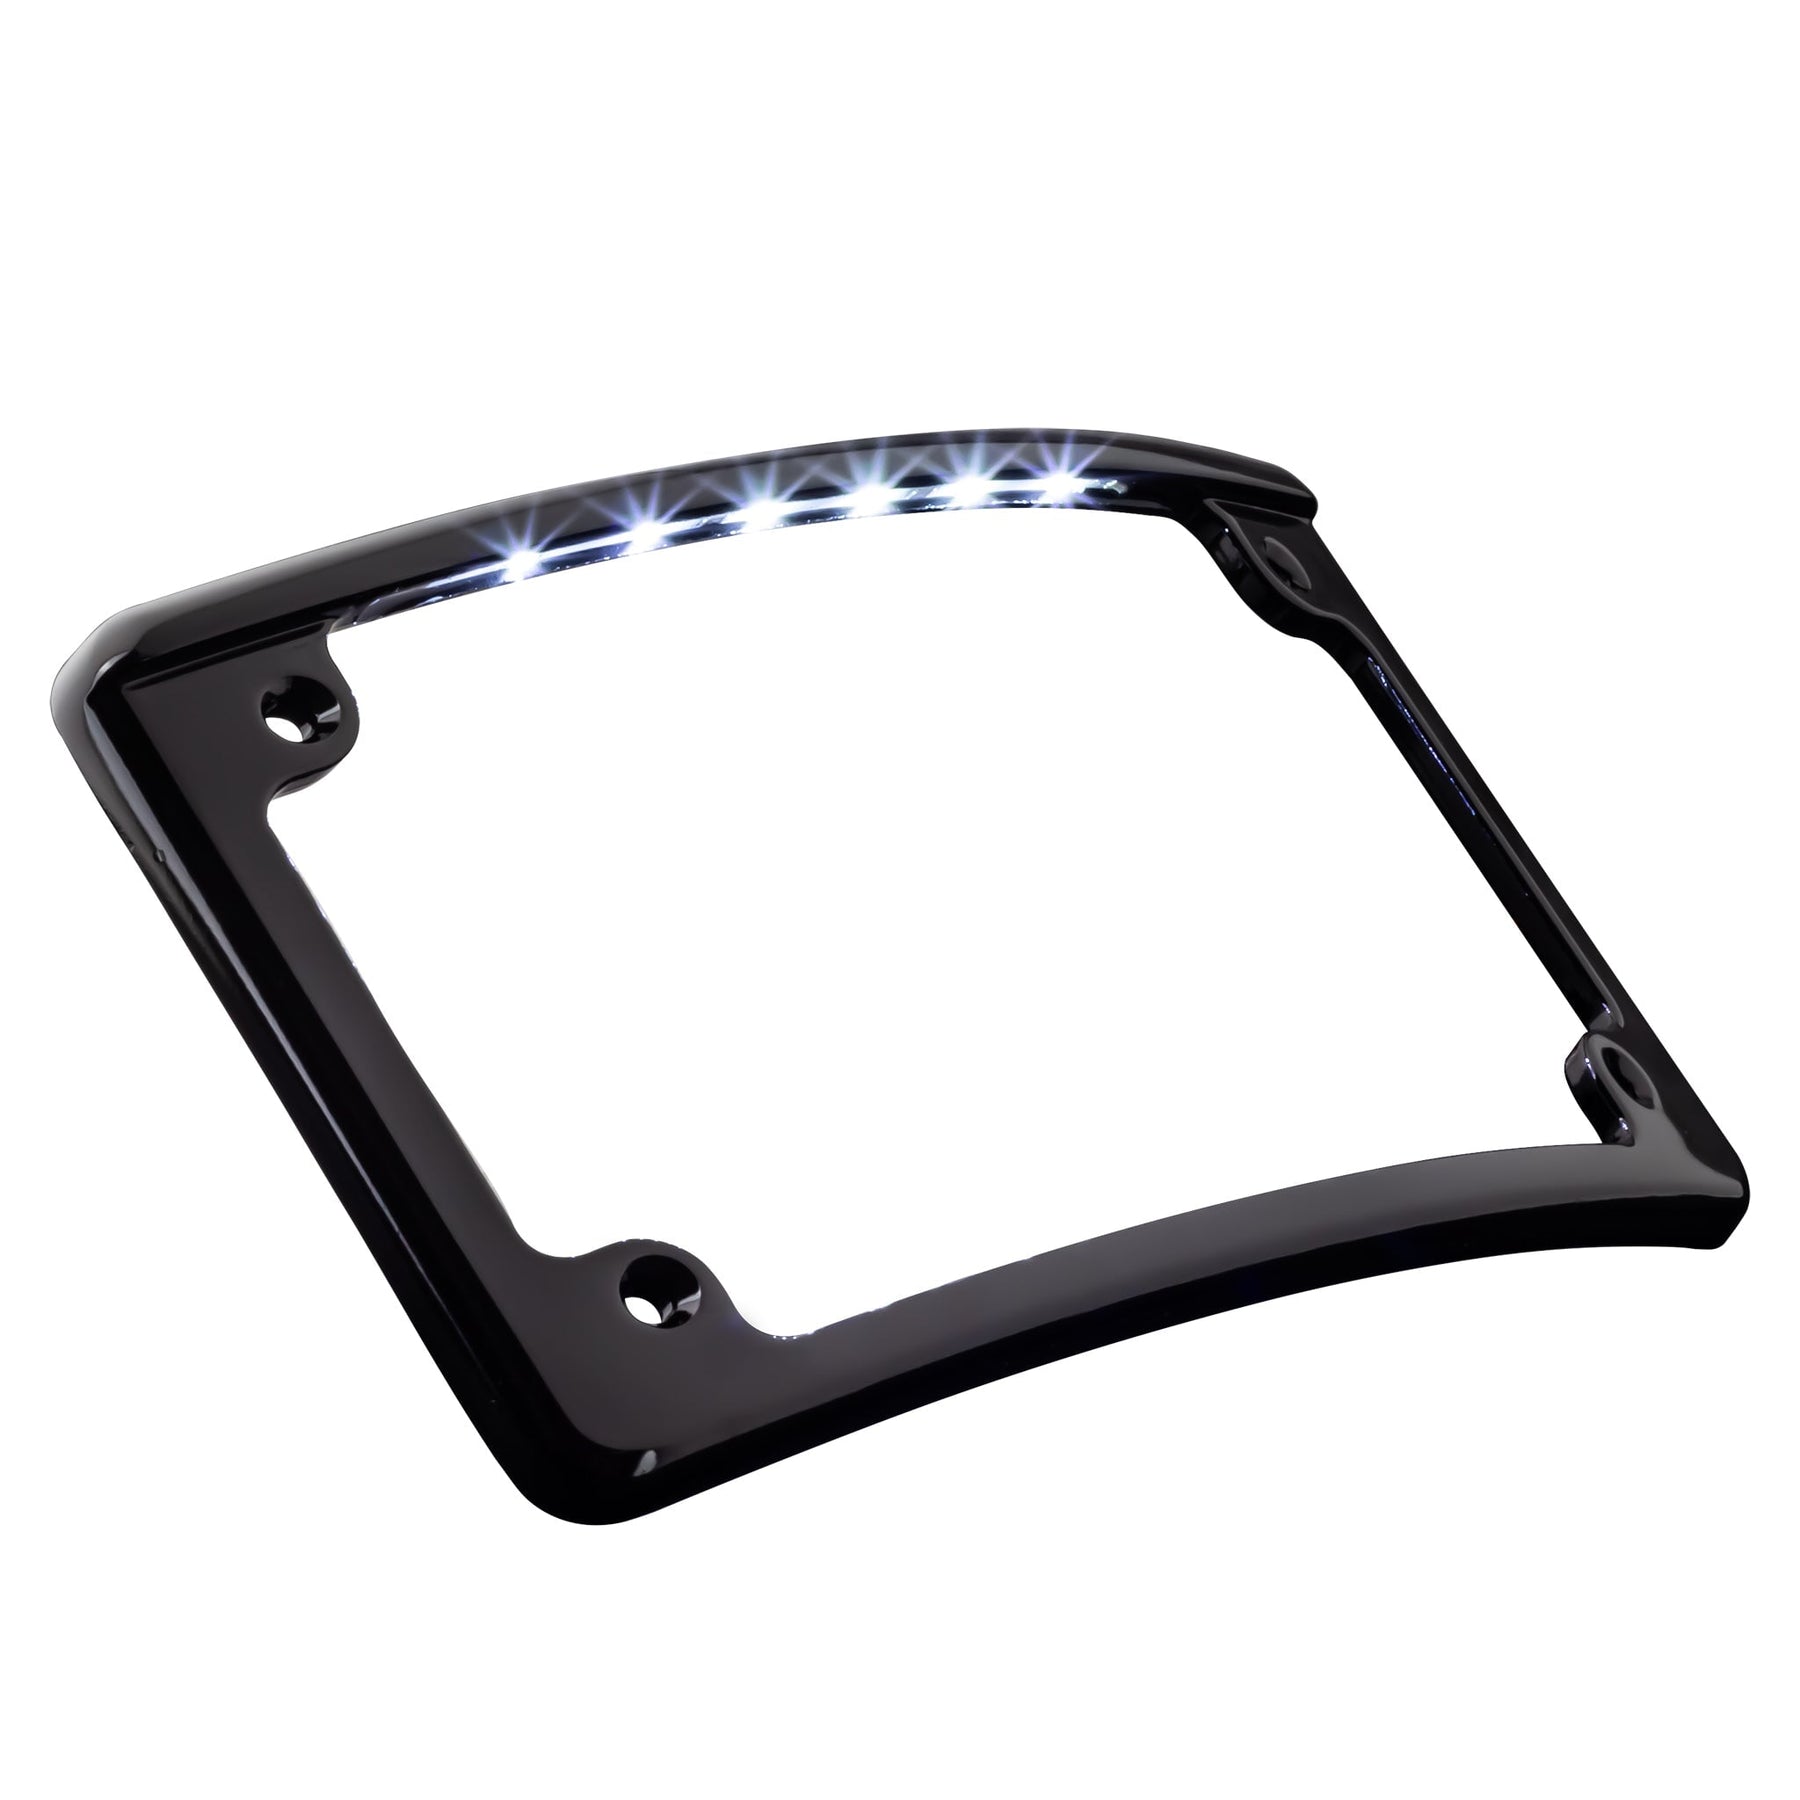 Eagle Lights Curved LED License Plate with Light for 2006 - 2023 Harley Davidson Motorcycles